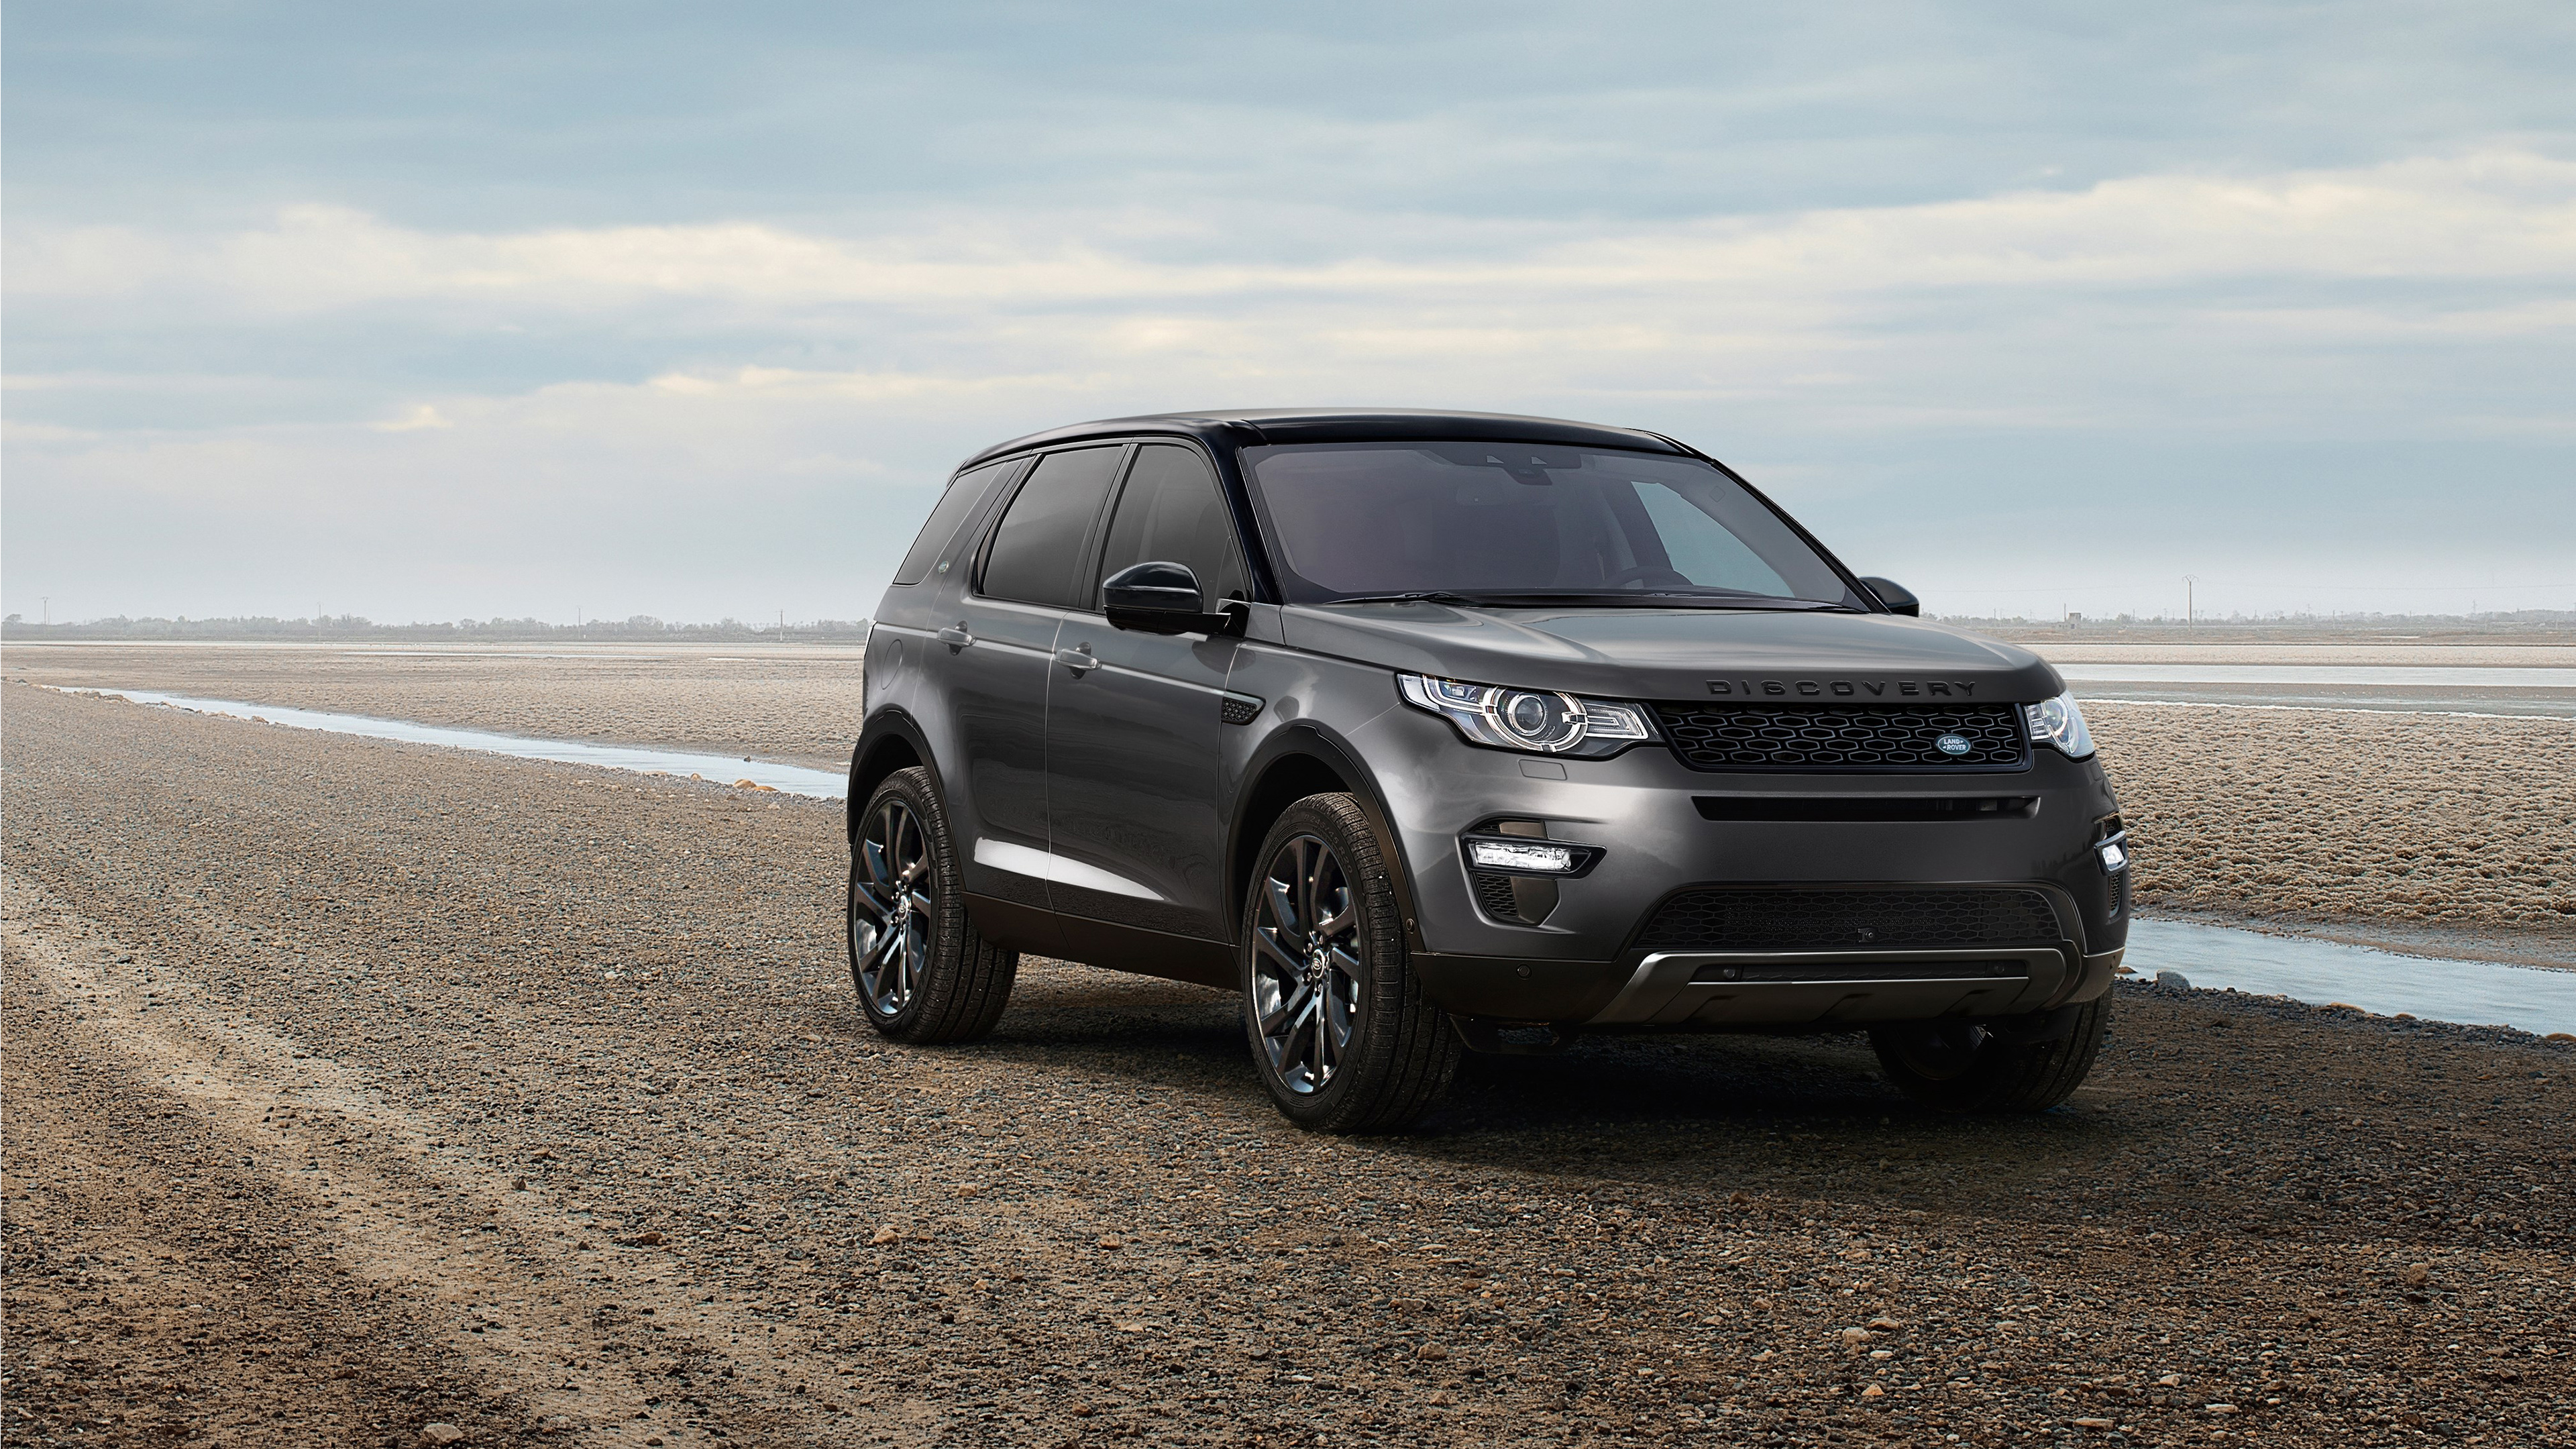 2017 Land Rover Discovery Sport 4K Wallpaper | HD Car Wallpapers | ID #6862